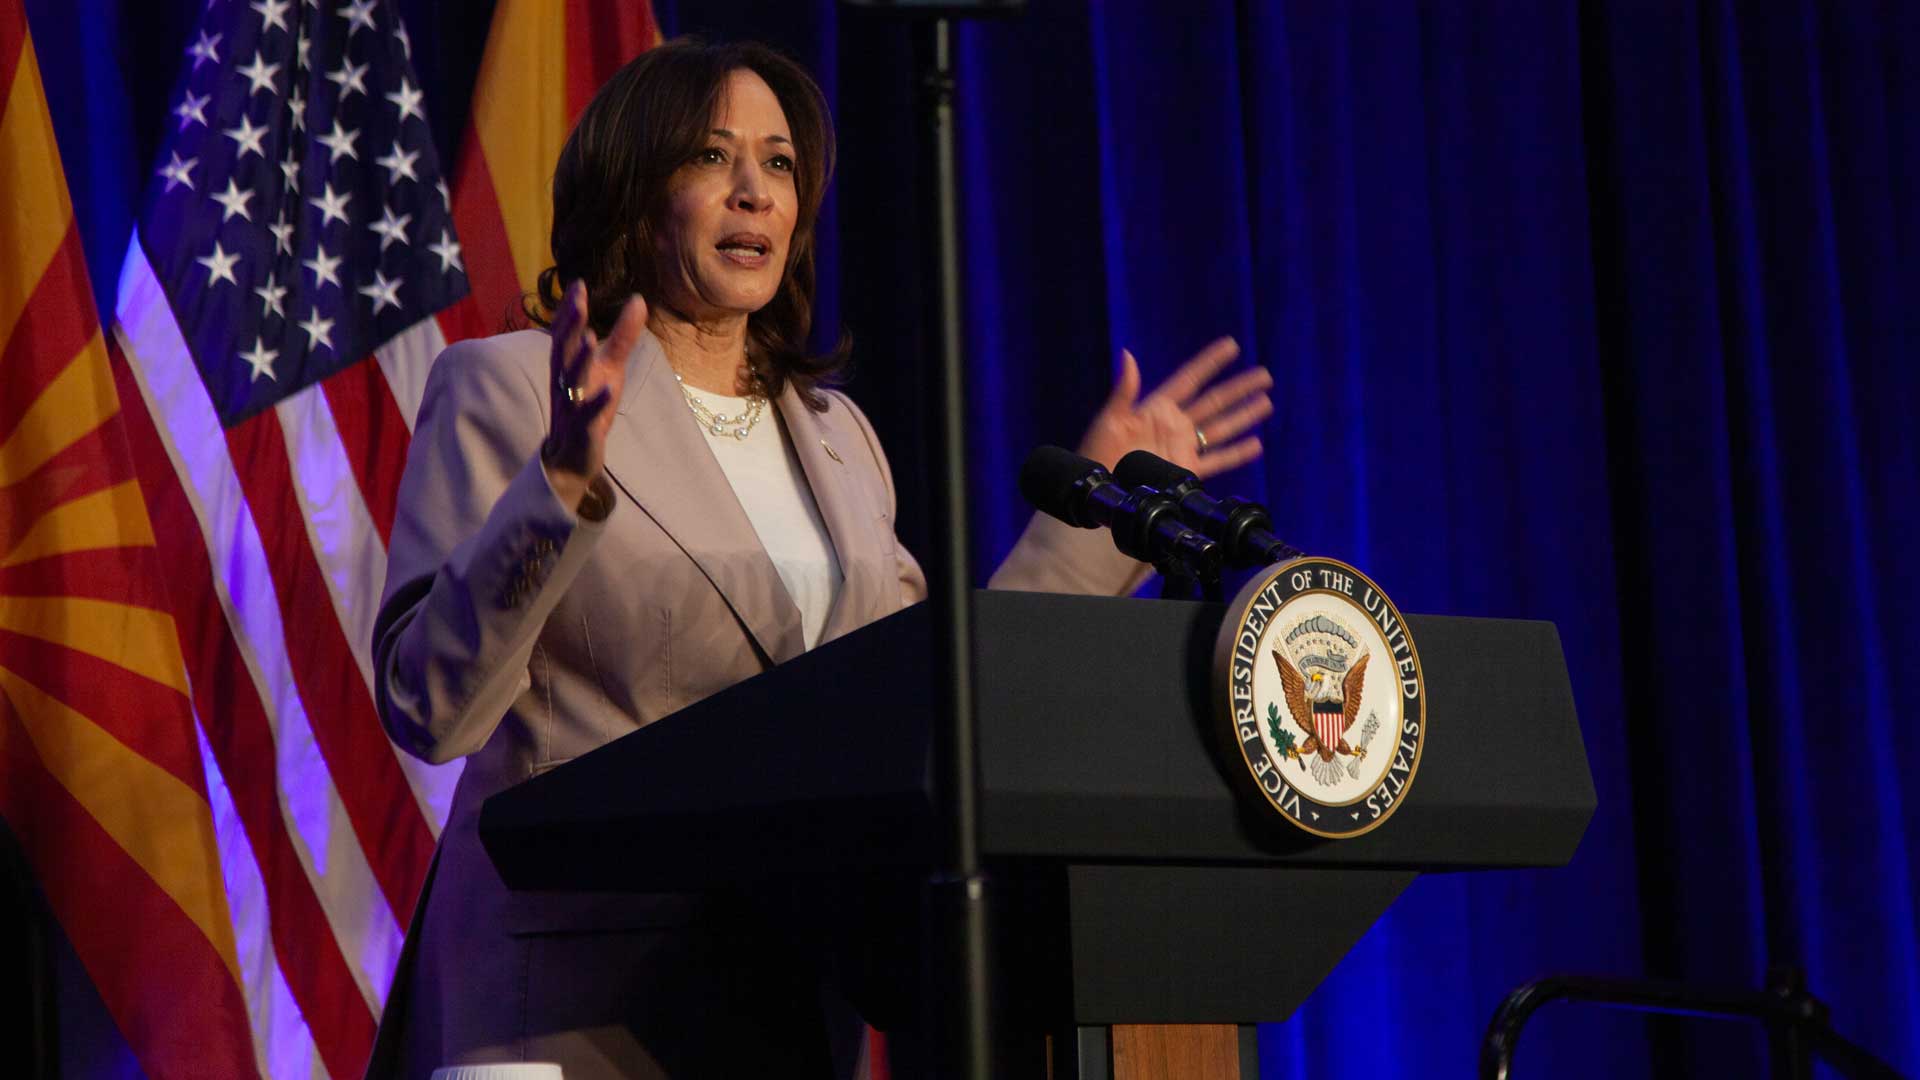 Days after abortion ruling: Vice President Harris visits AZ to discuss access 